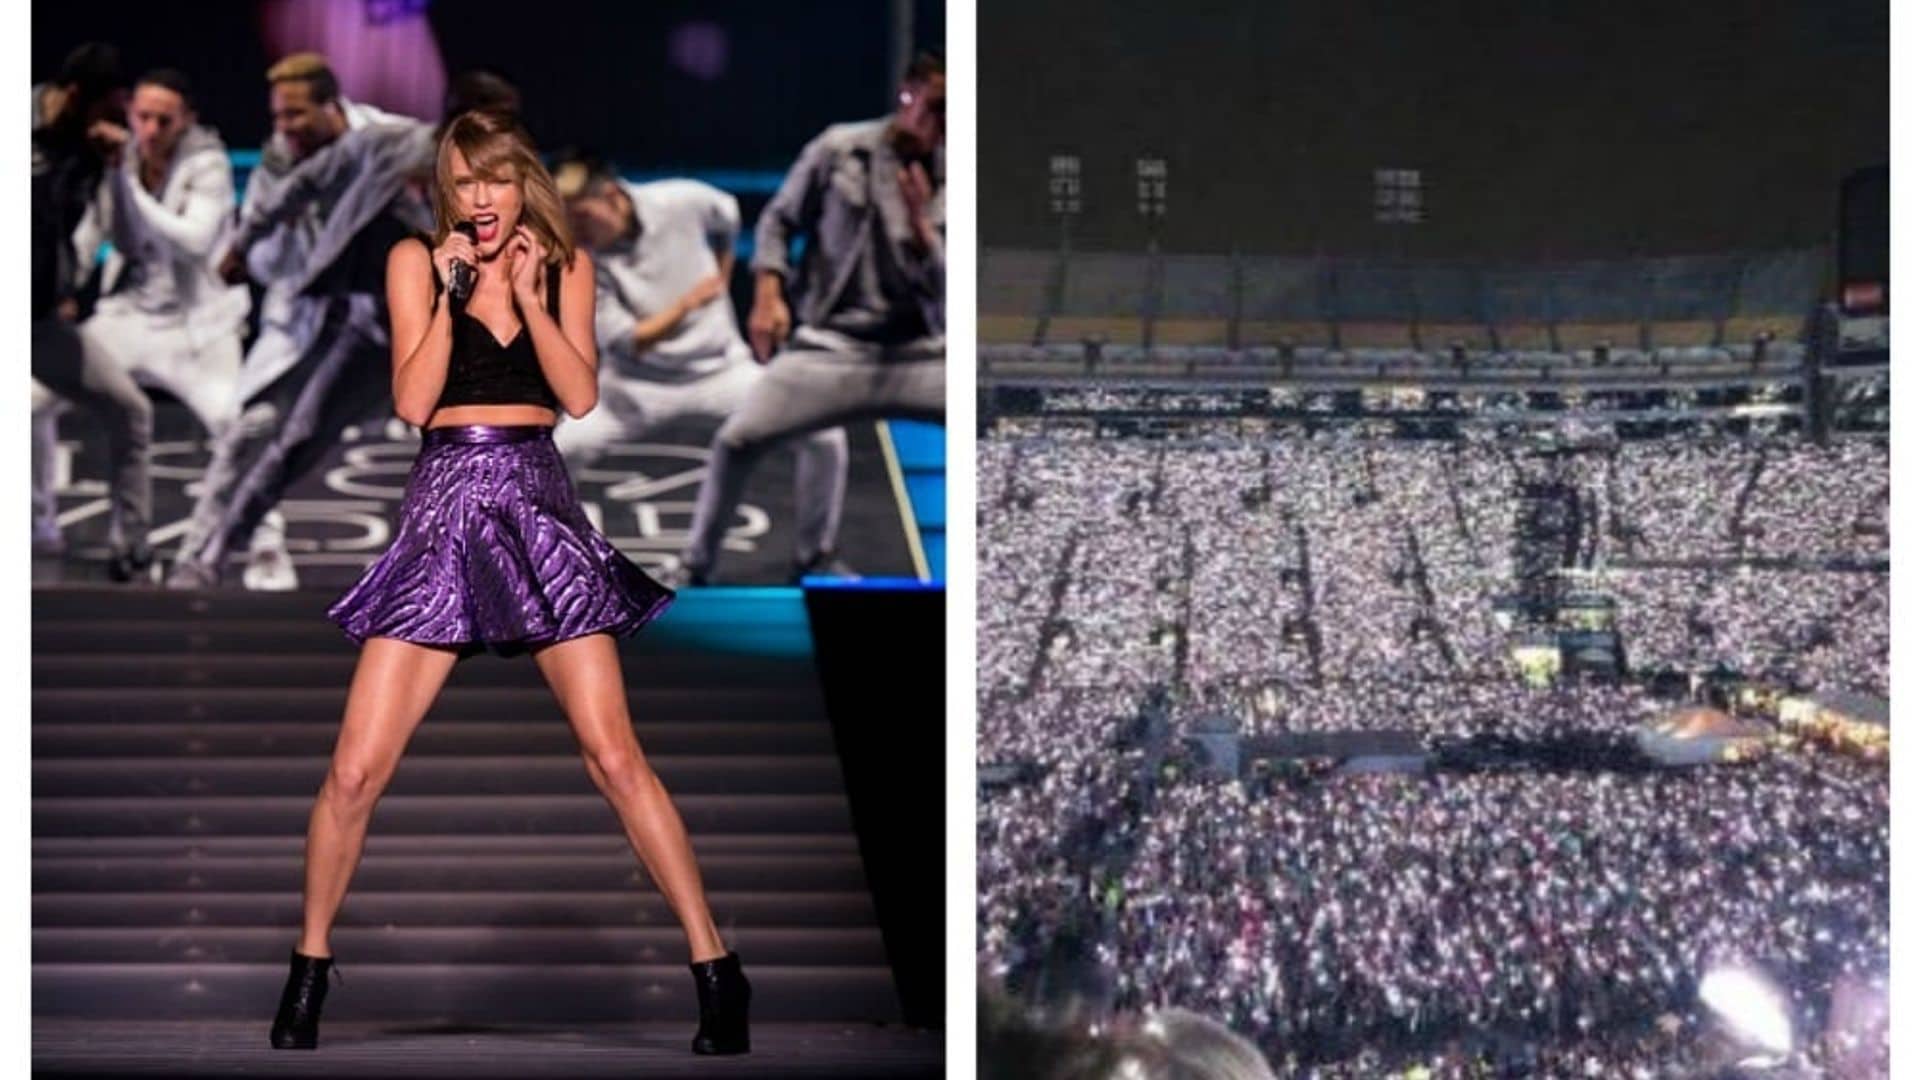 Taylor Swift's concert bracelet saves the lives of three teen girls